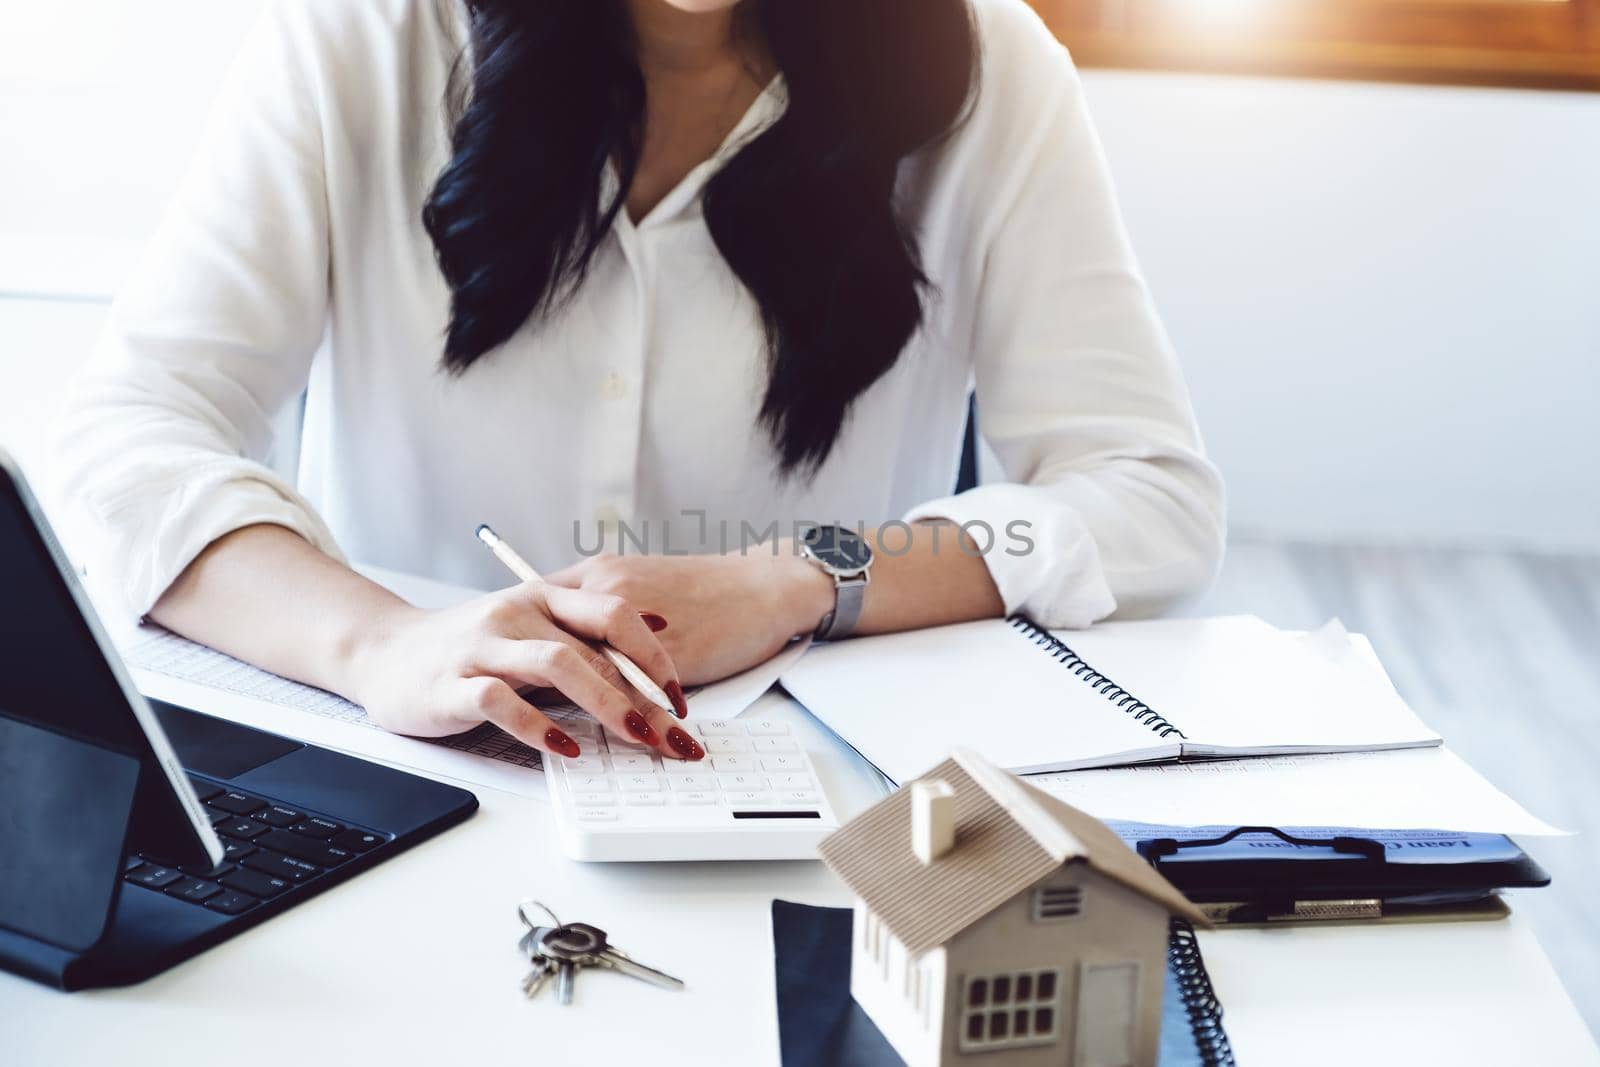 Entrepreneurs, business owners, accountants, real estate agents Asian women who use the home buying budget calculator to calculate their financial risks